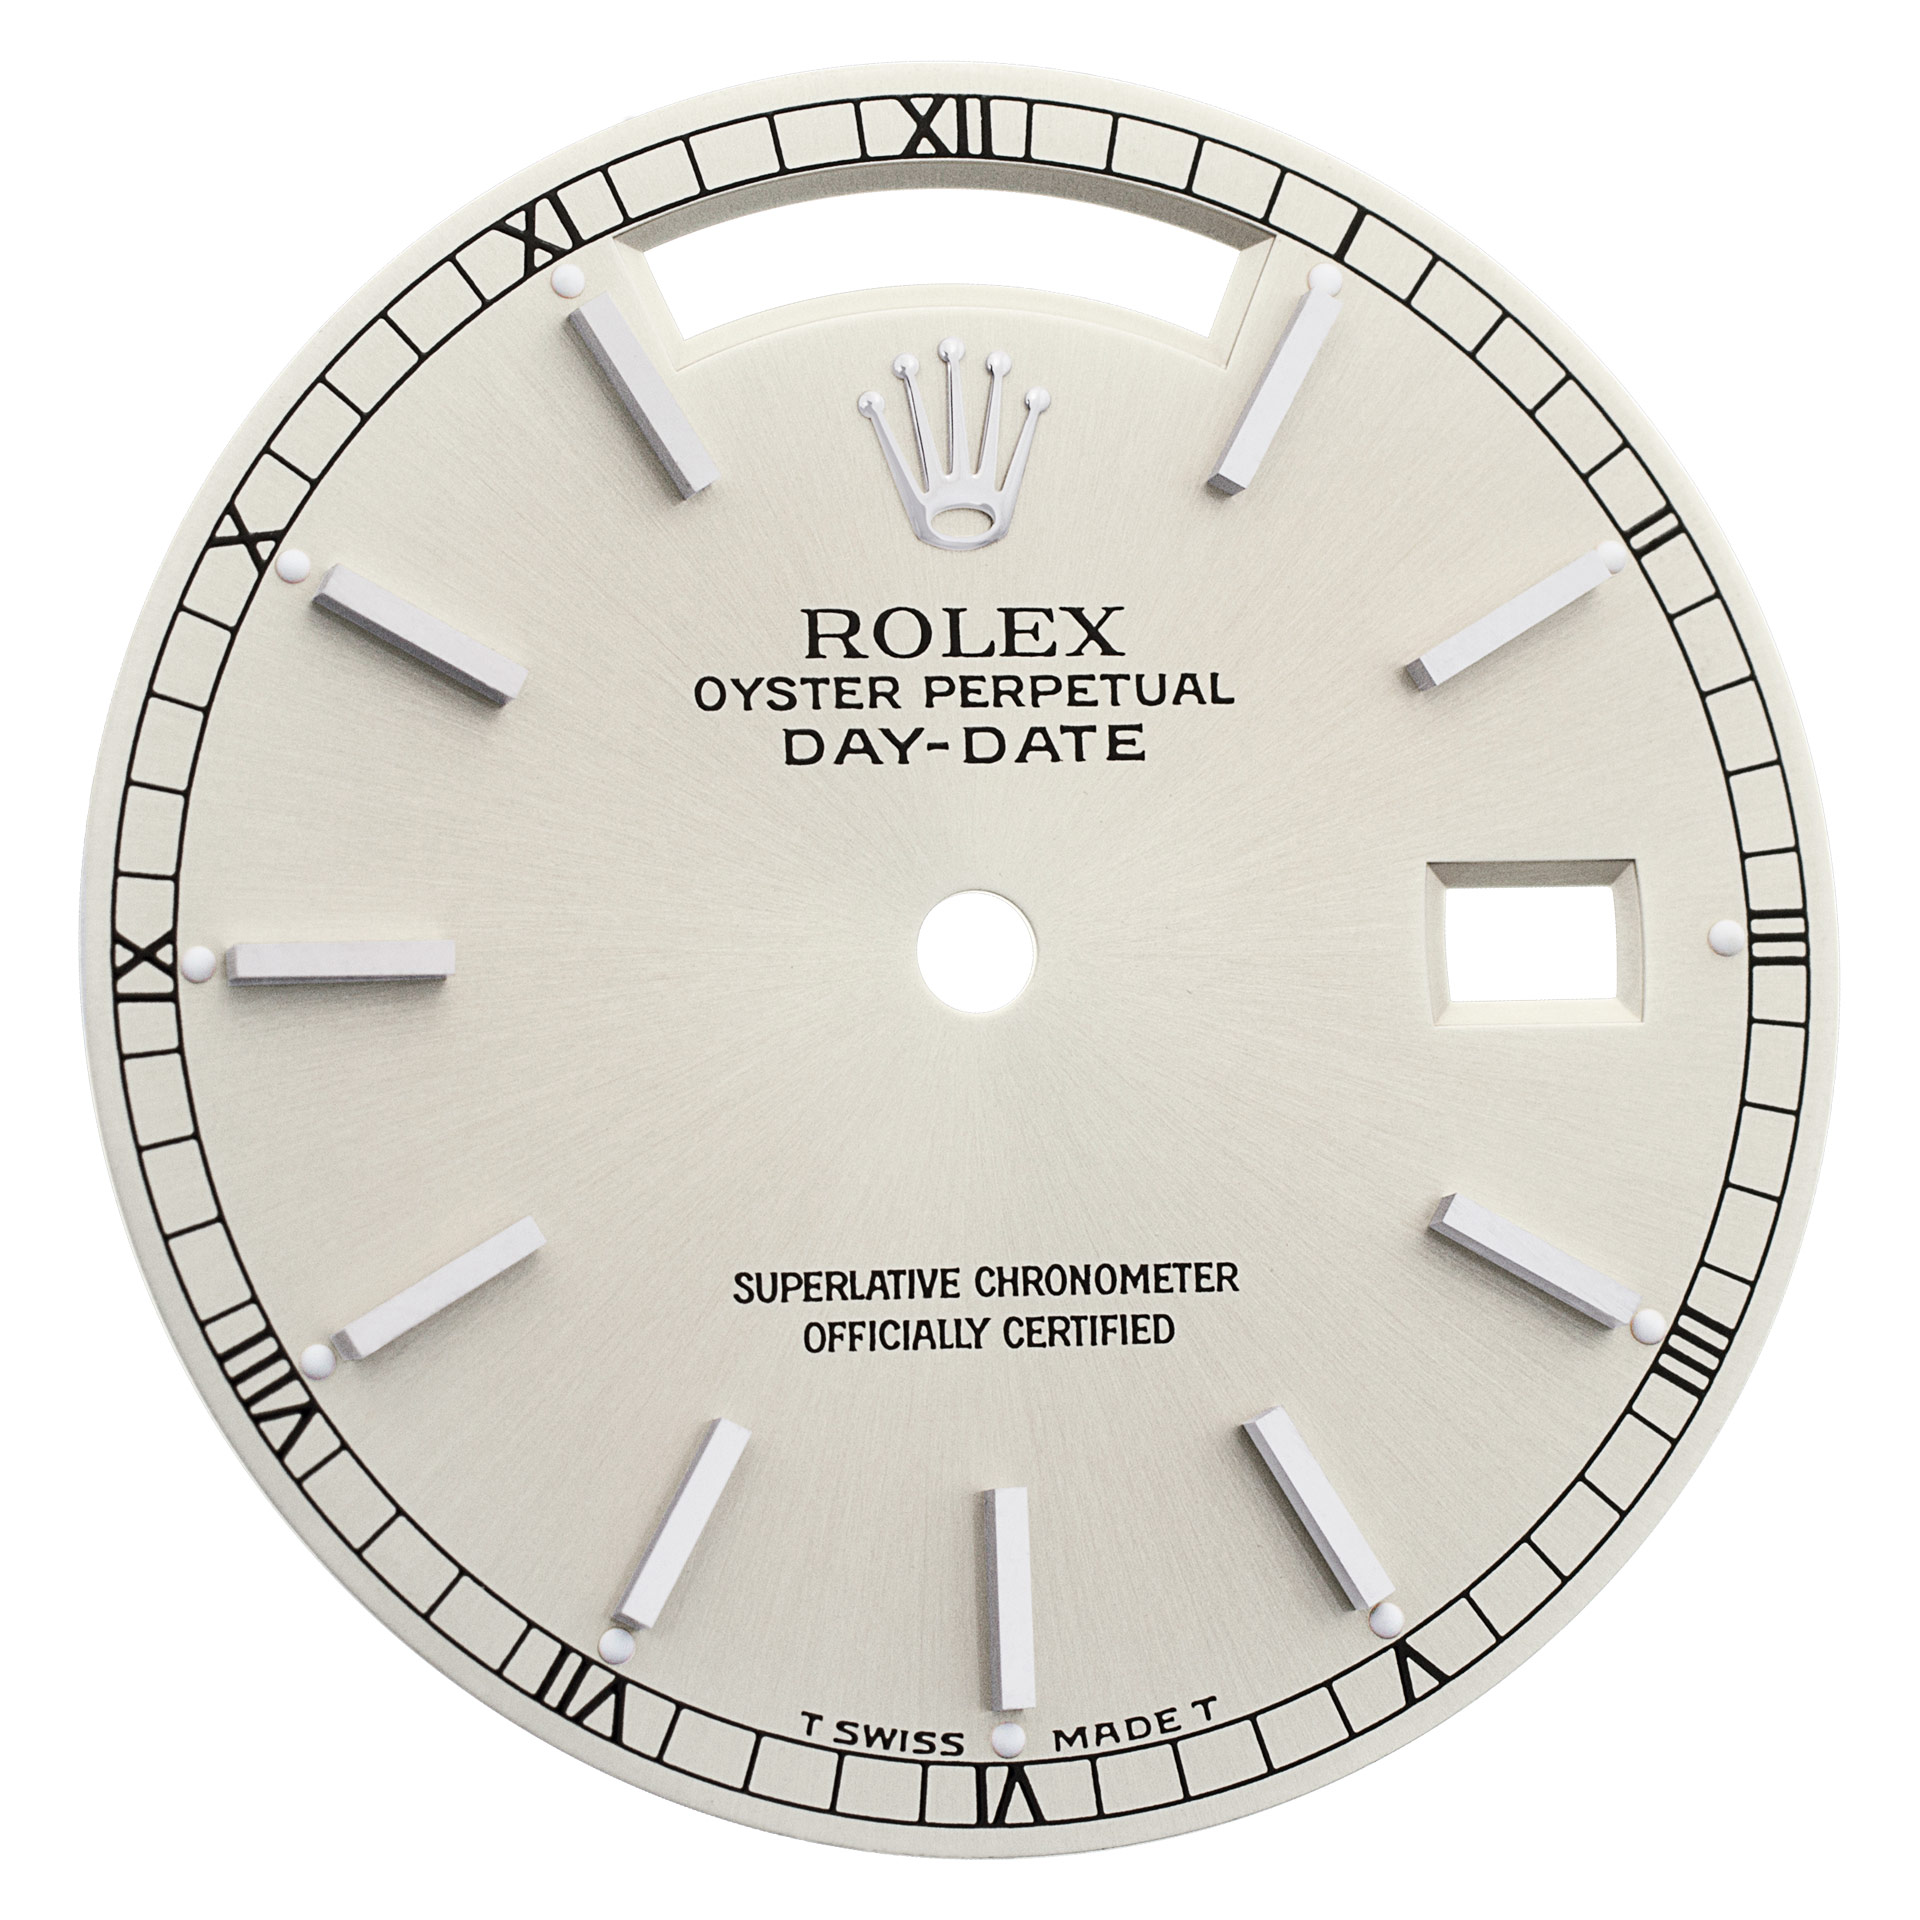 Rolex Day-date silver dial